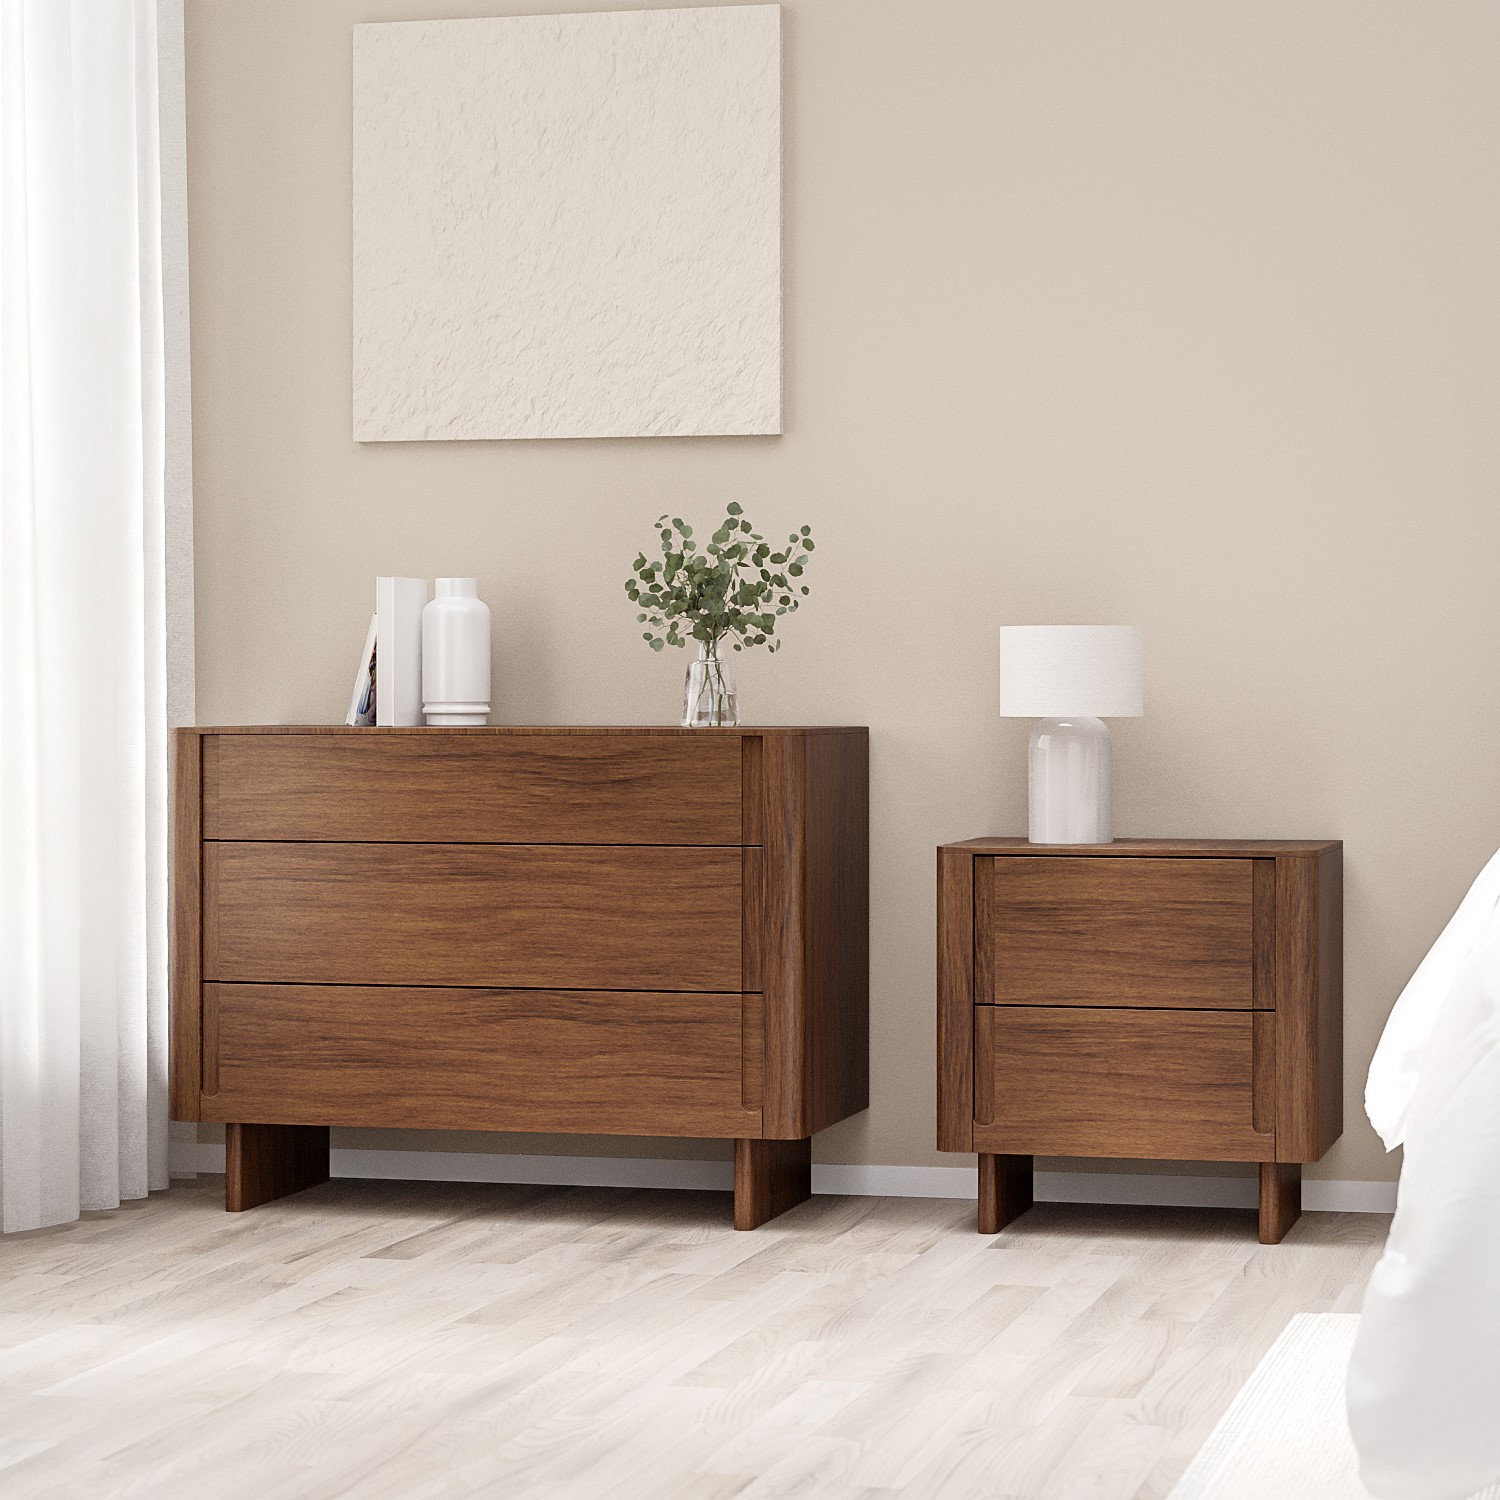 Photo of Dark wood bedside table and chest of drawers set - emile sustainable furniture